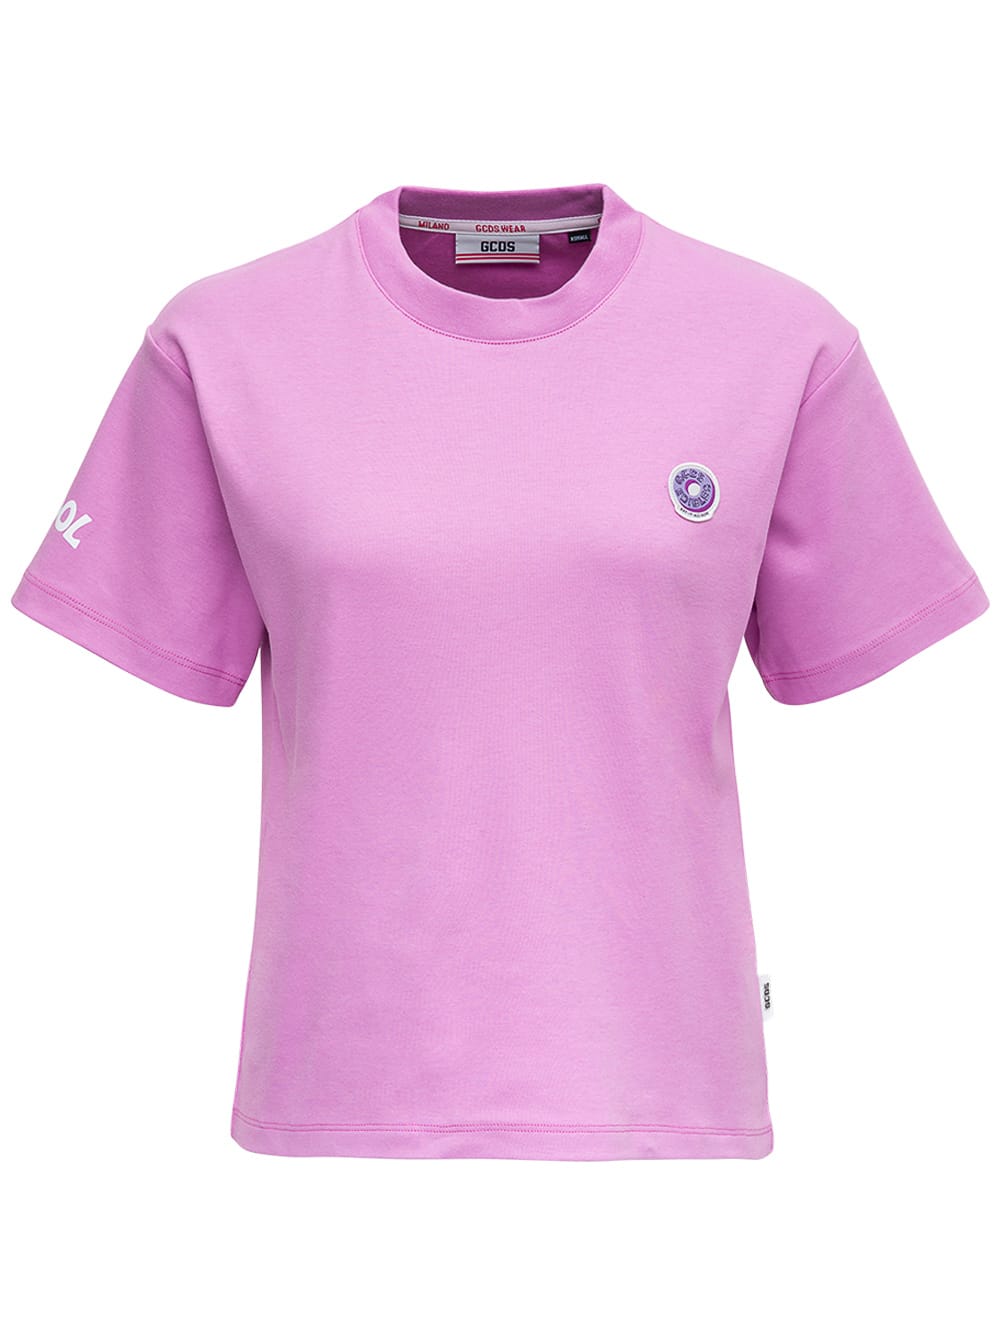 GCDS Pink Cotton T-shirt With Back Print